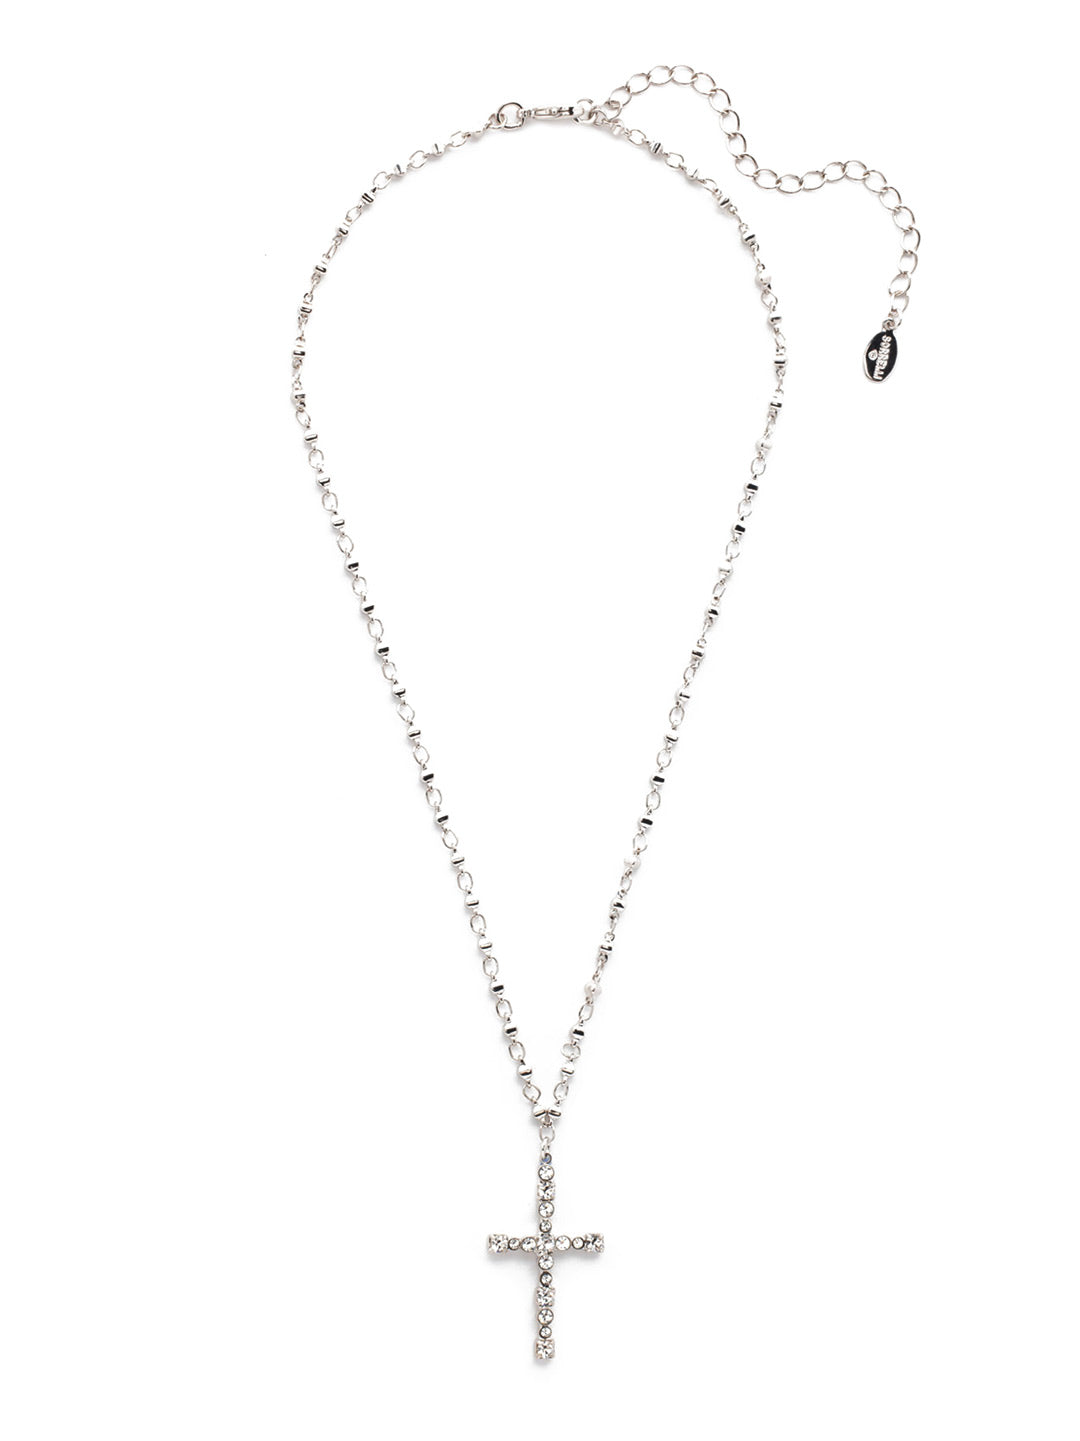 Charmaine Cross Pendant Necklace - NEX2PDCRY - Perfect for any occasion, the Charmaine Cross Pendant Necklace spotlights a crystal studded cross on an adjustable chain. From Sorrelli's Crystal collection in our Palladium finish.